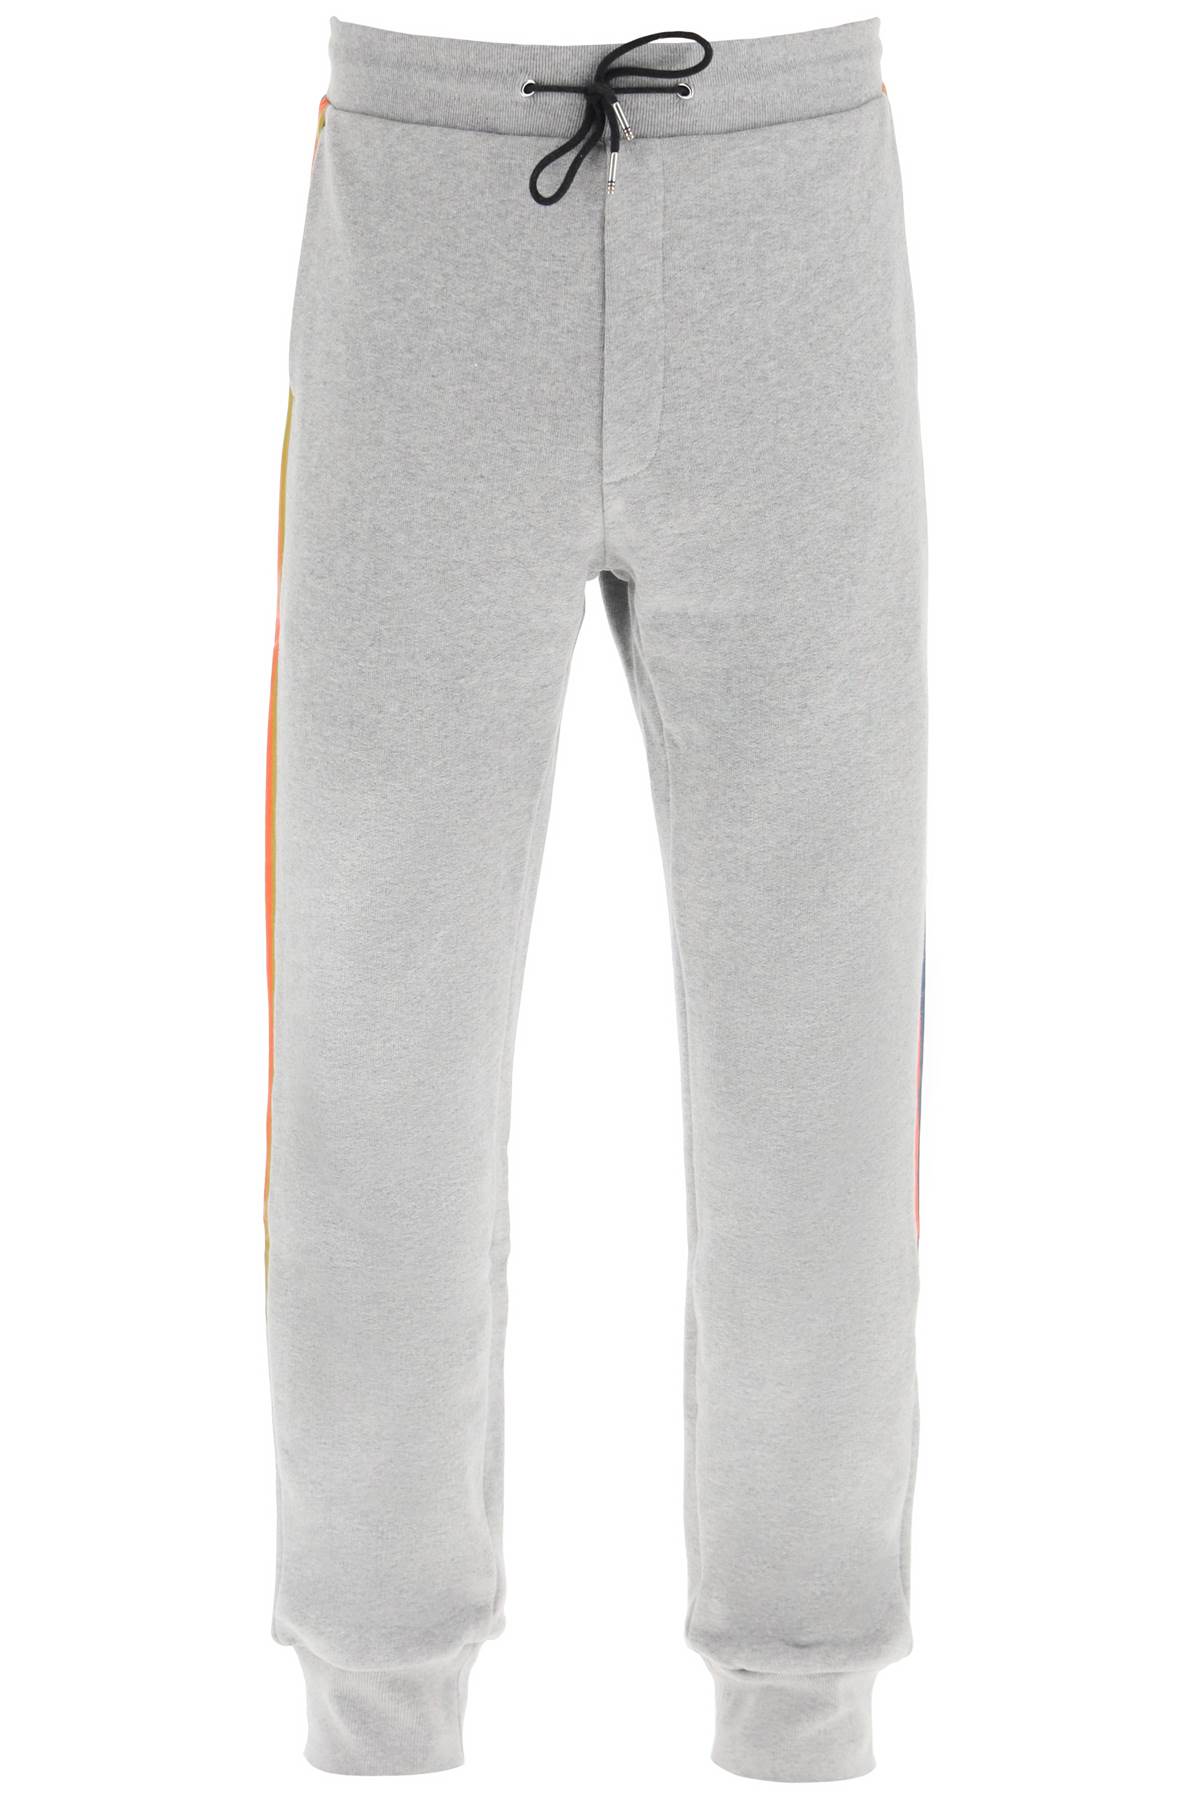 Paul Smith Cotton Jogger Pants With artist Stripe Side Bands